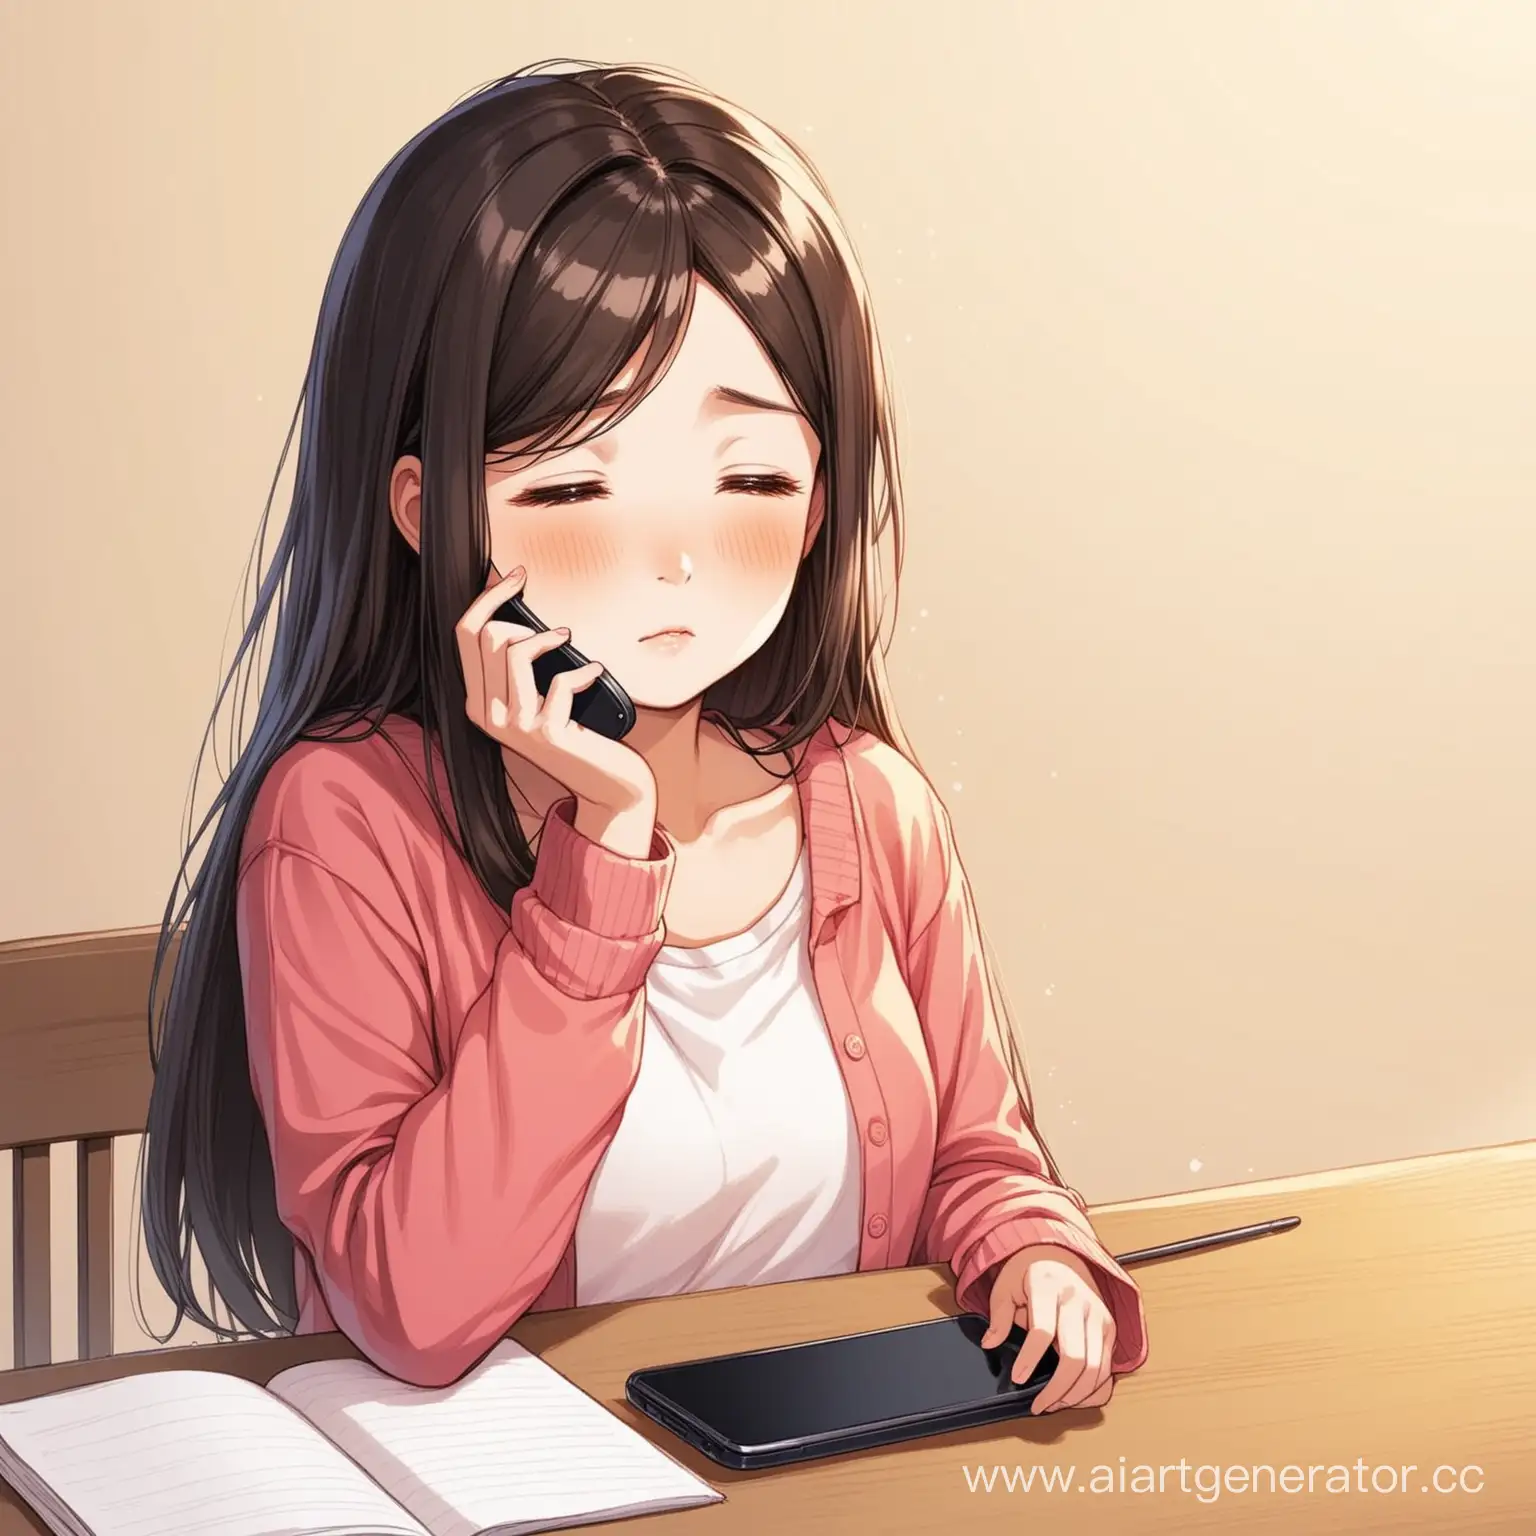 One day one girl received a  phone message from the other girl's mother, begging her to contact her teenager daughter because she wrote that her daughter had a very big health issue and needed her. 